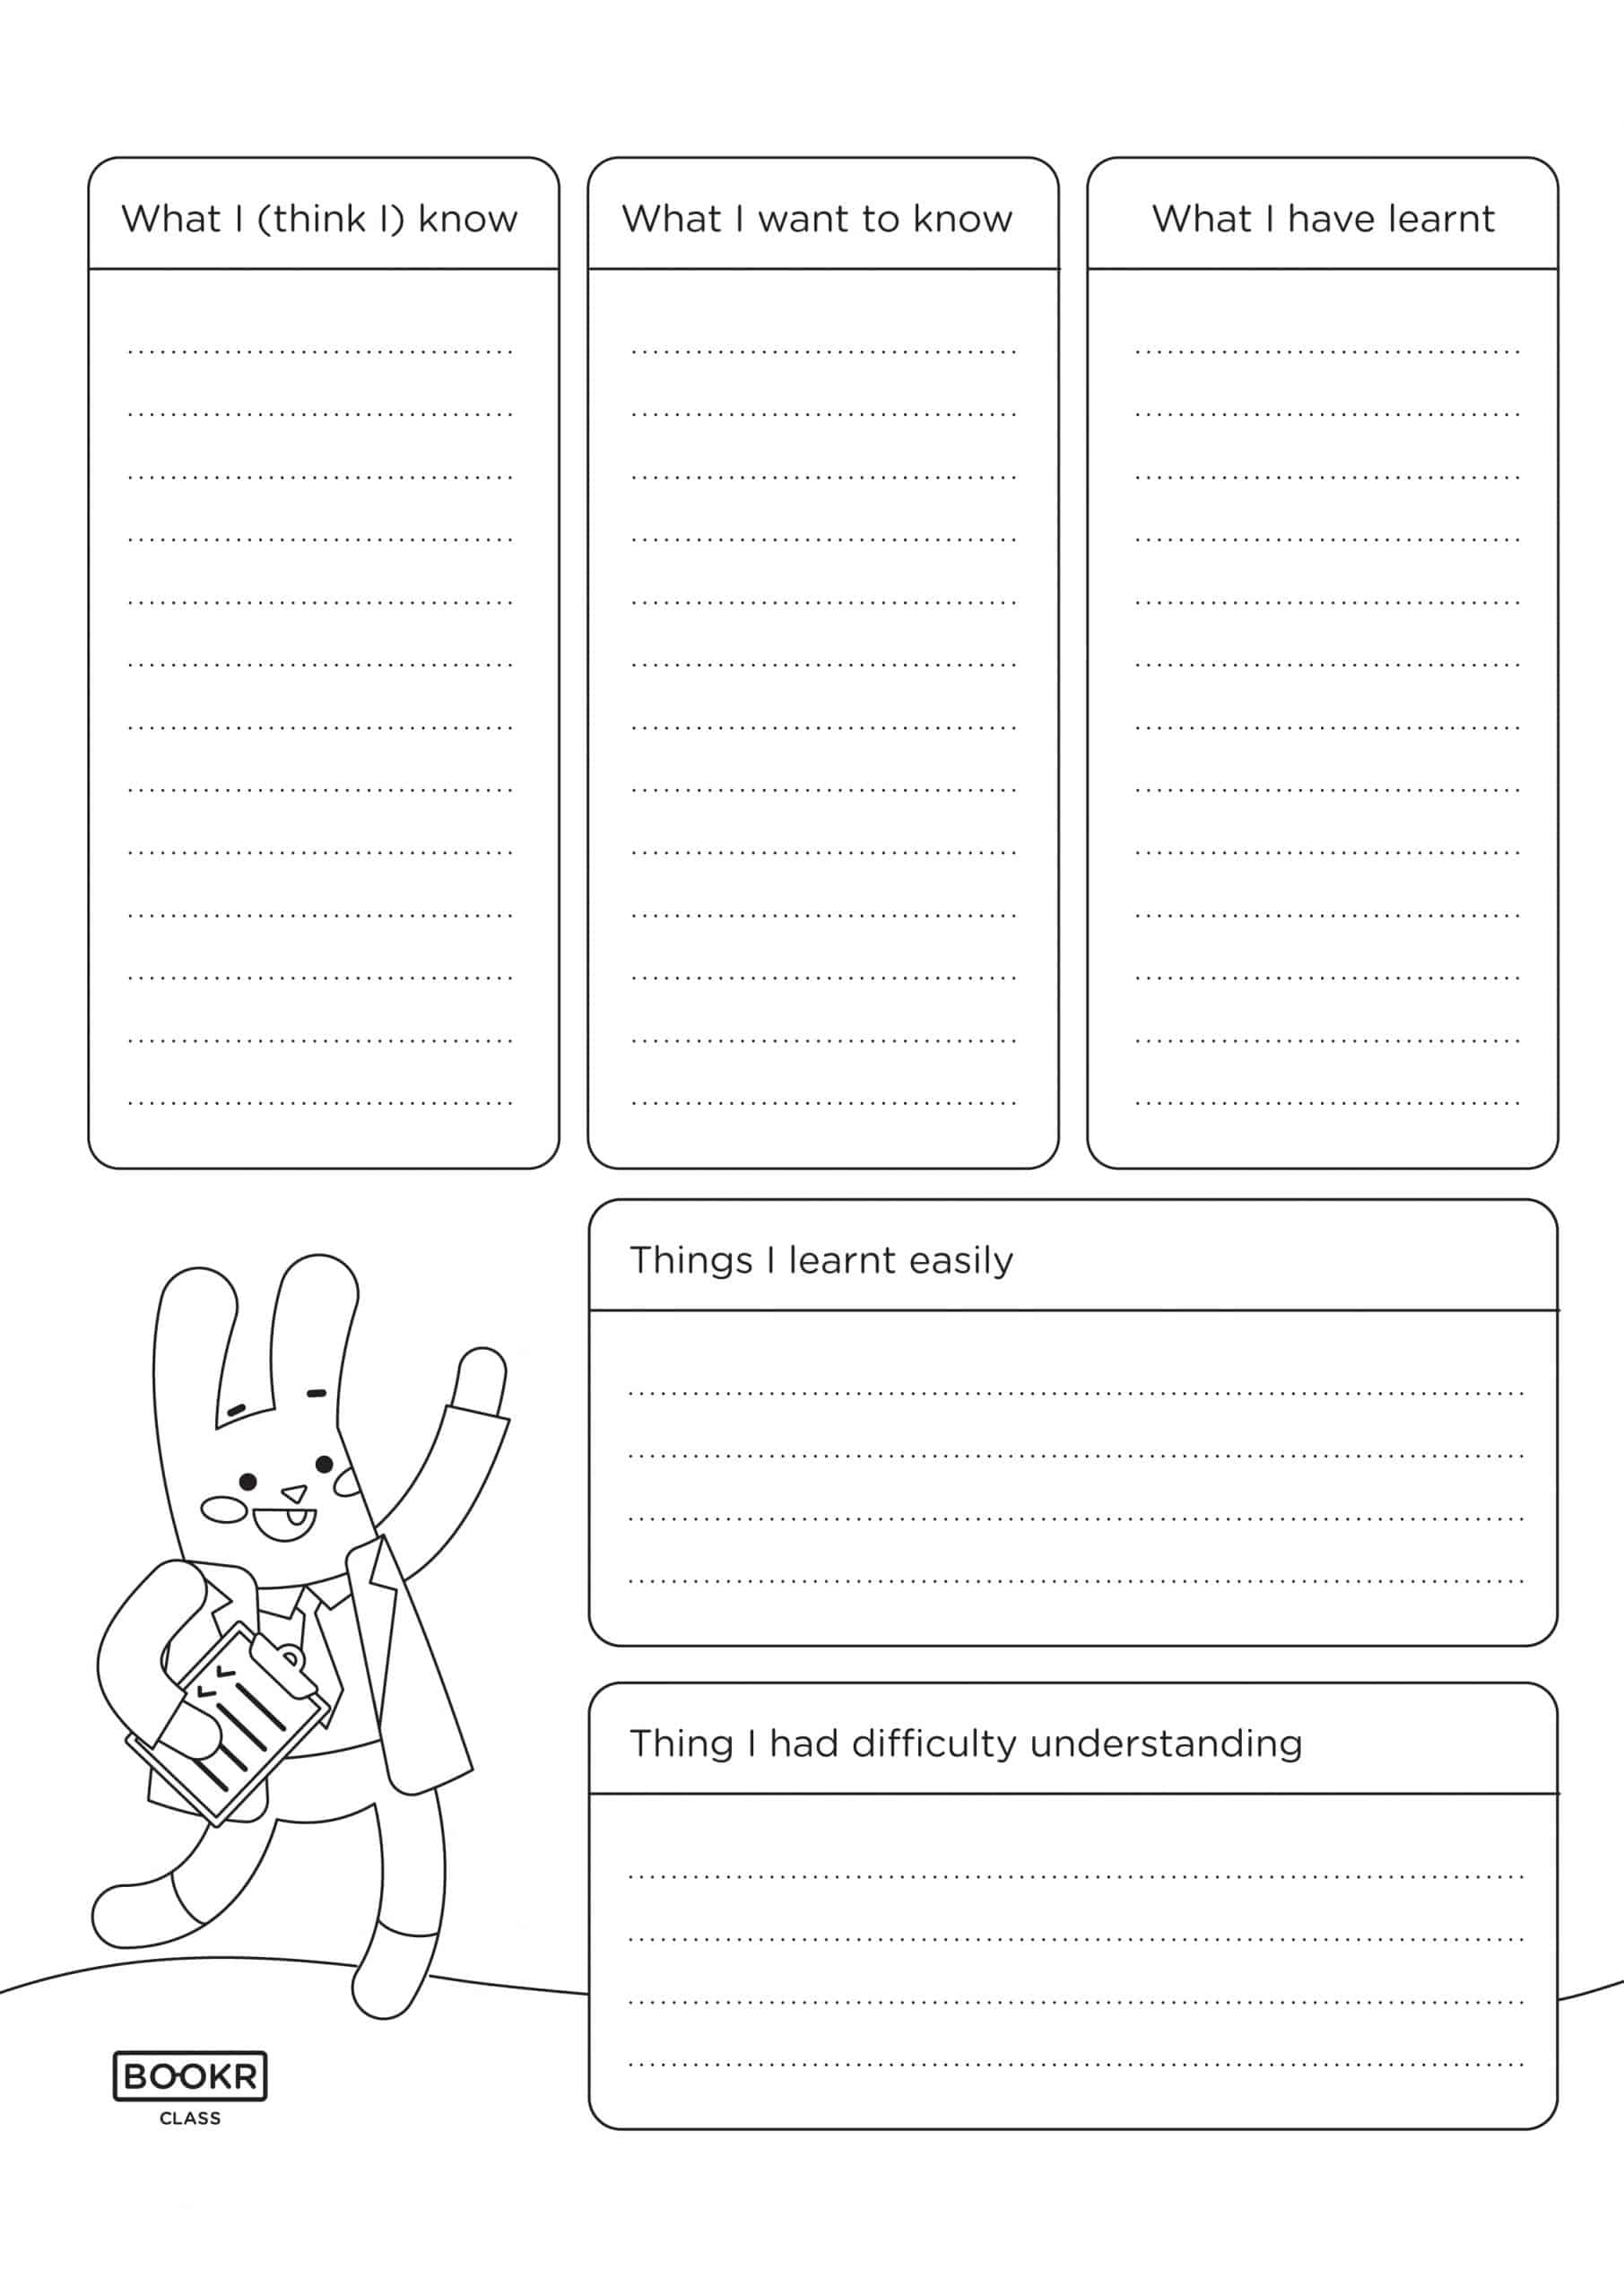 bookr-class-english-differentiation-worksheet